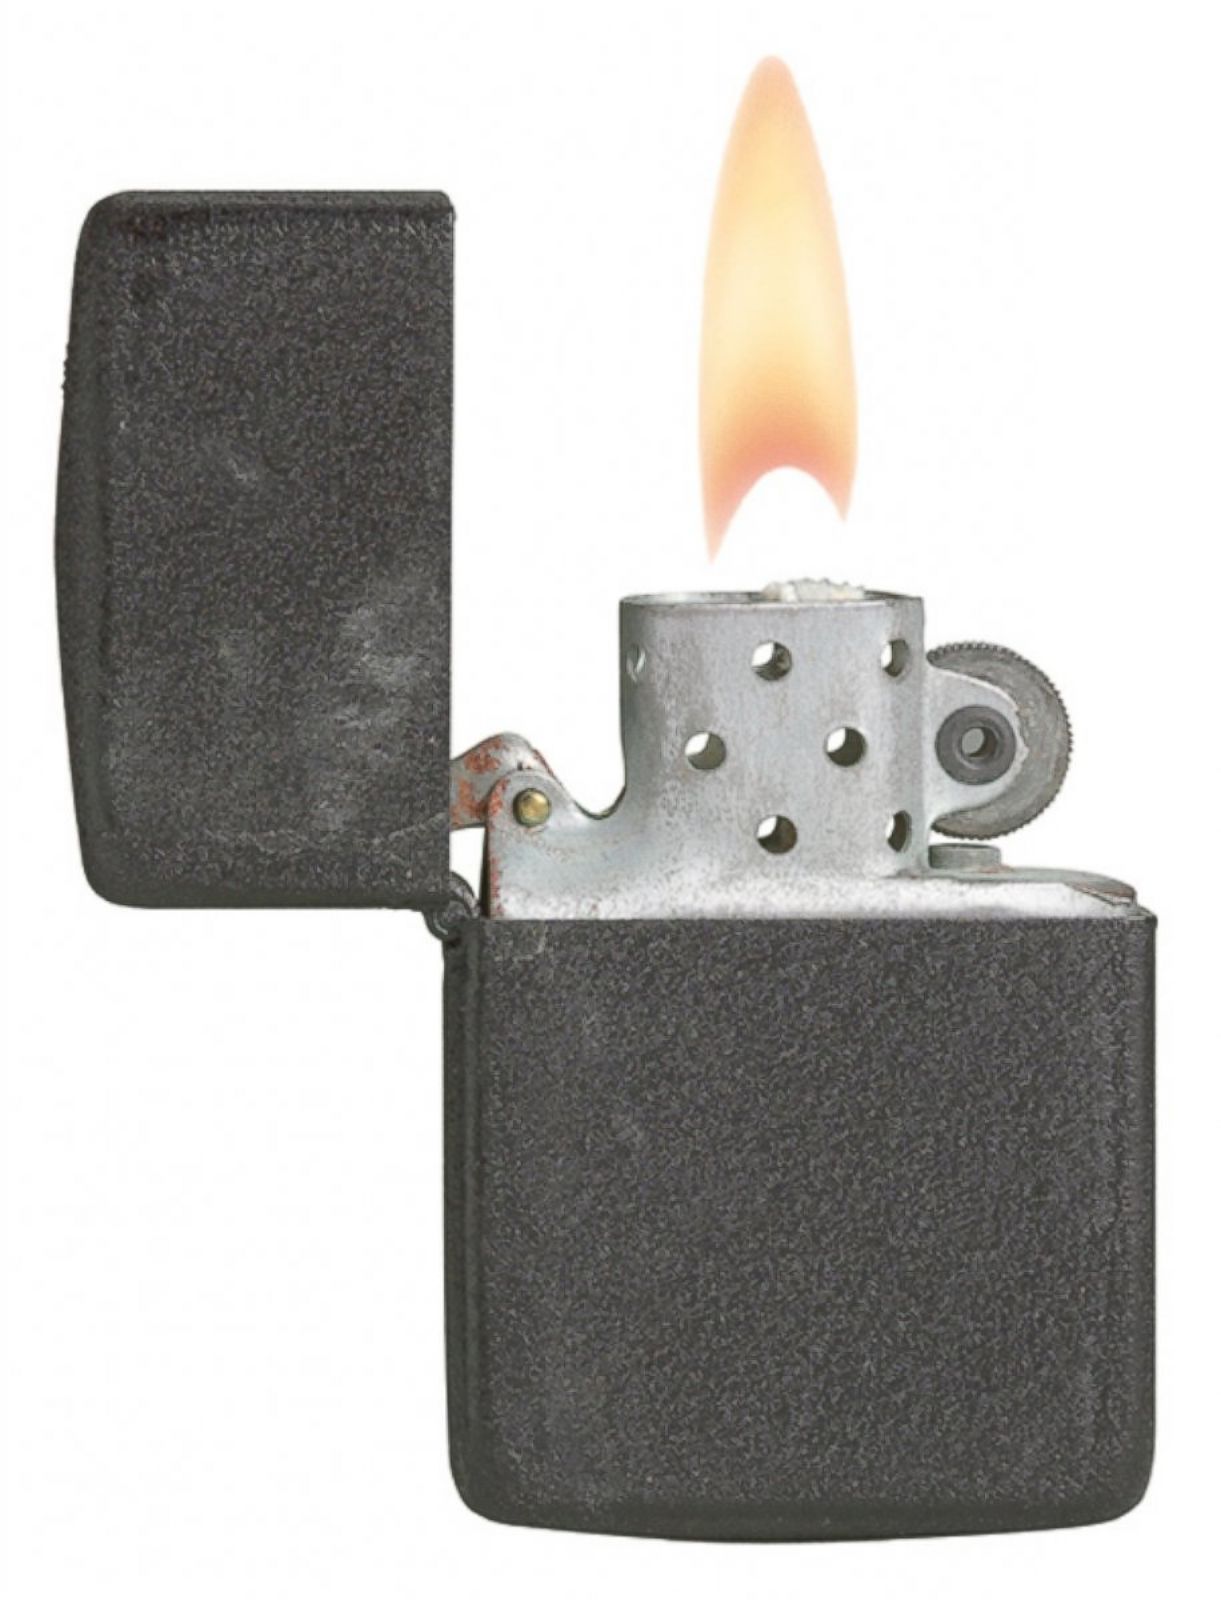 The Surprising Top-Selling Zippo Lighters - ABC News